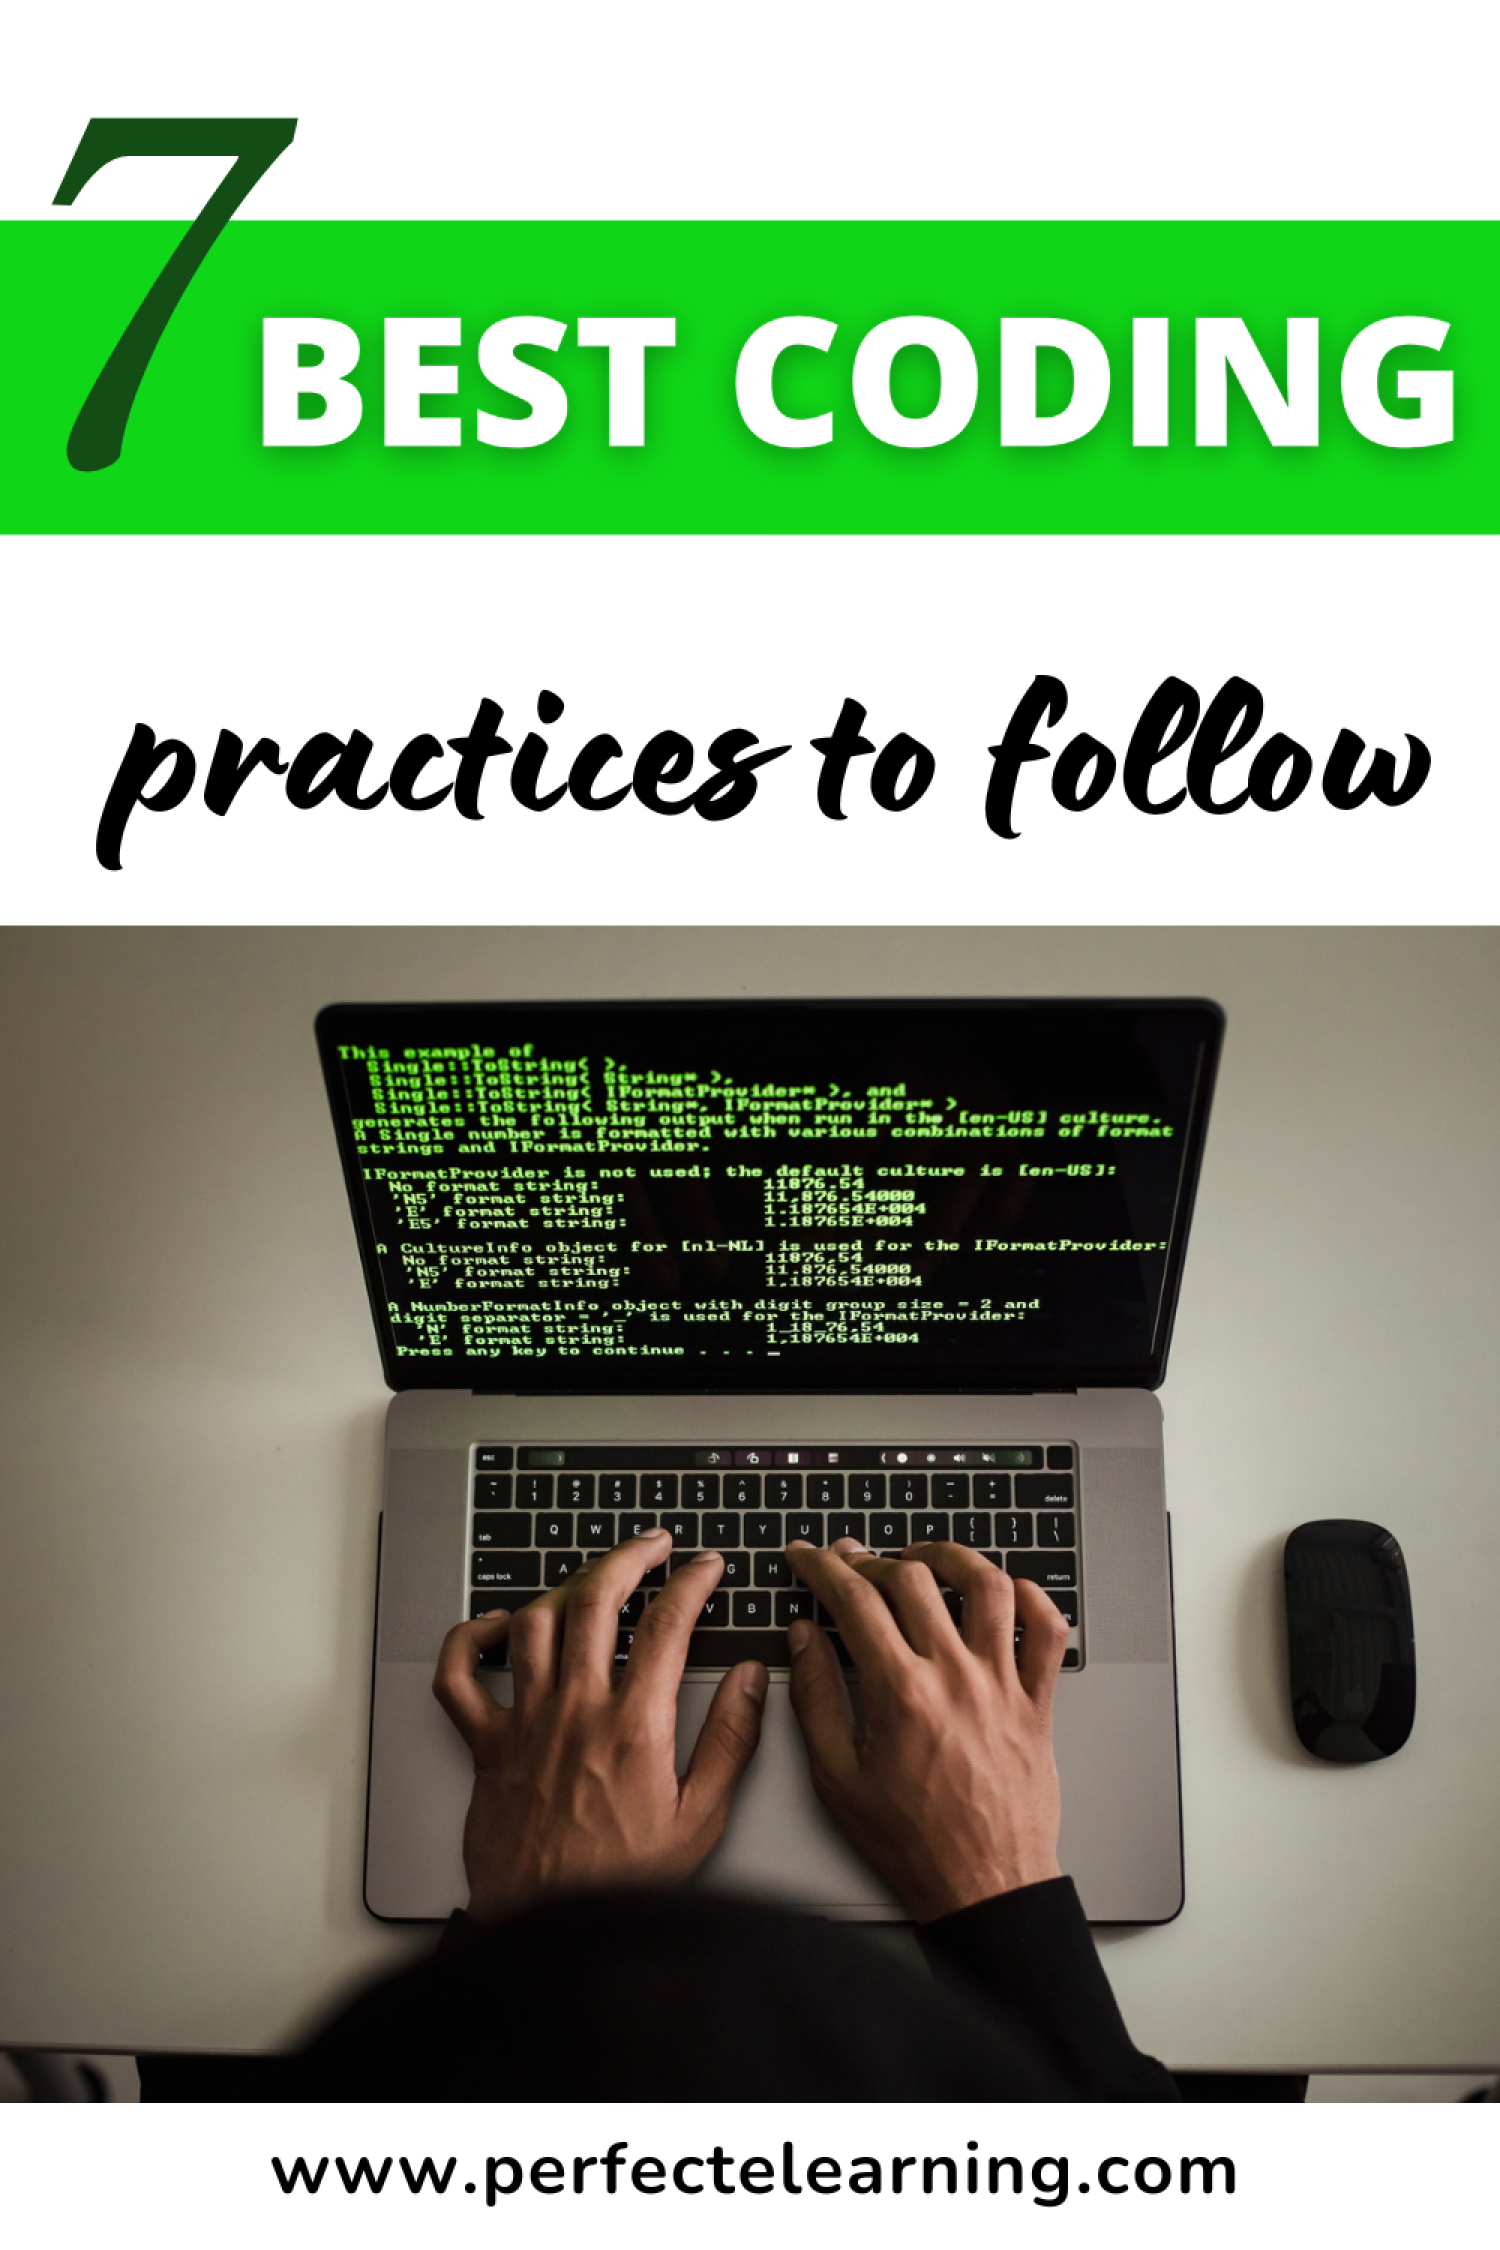 7 Best Coding Practices to Follow Infographic